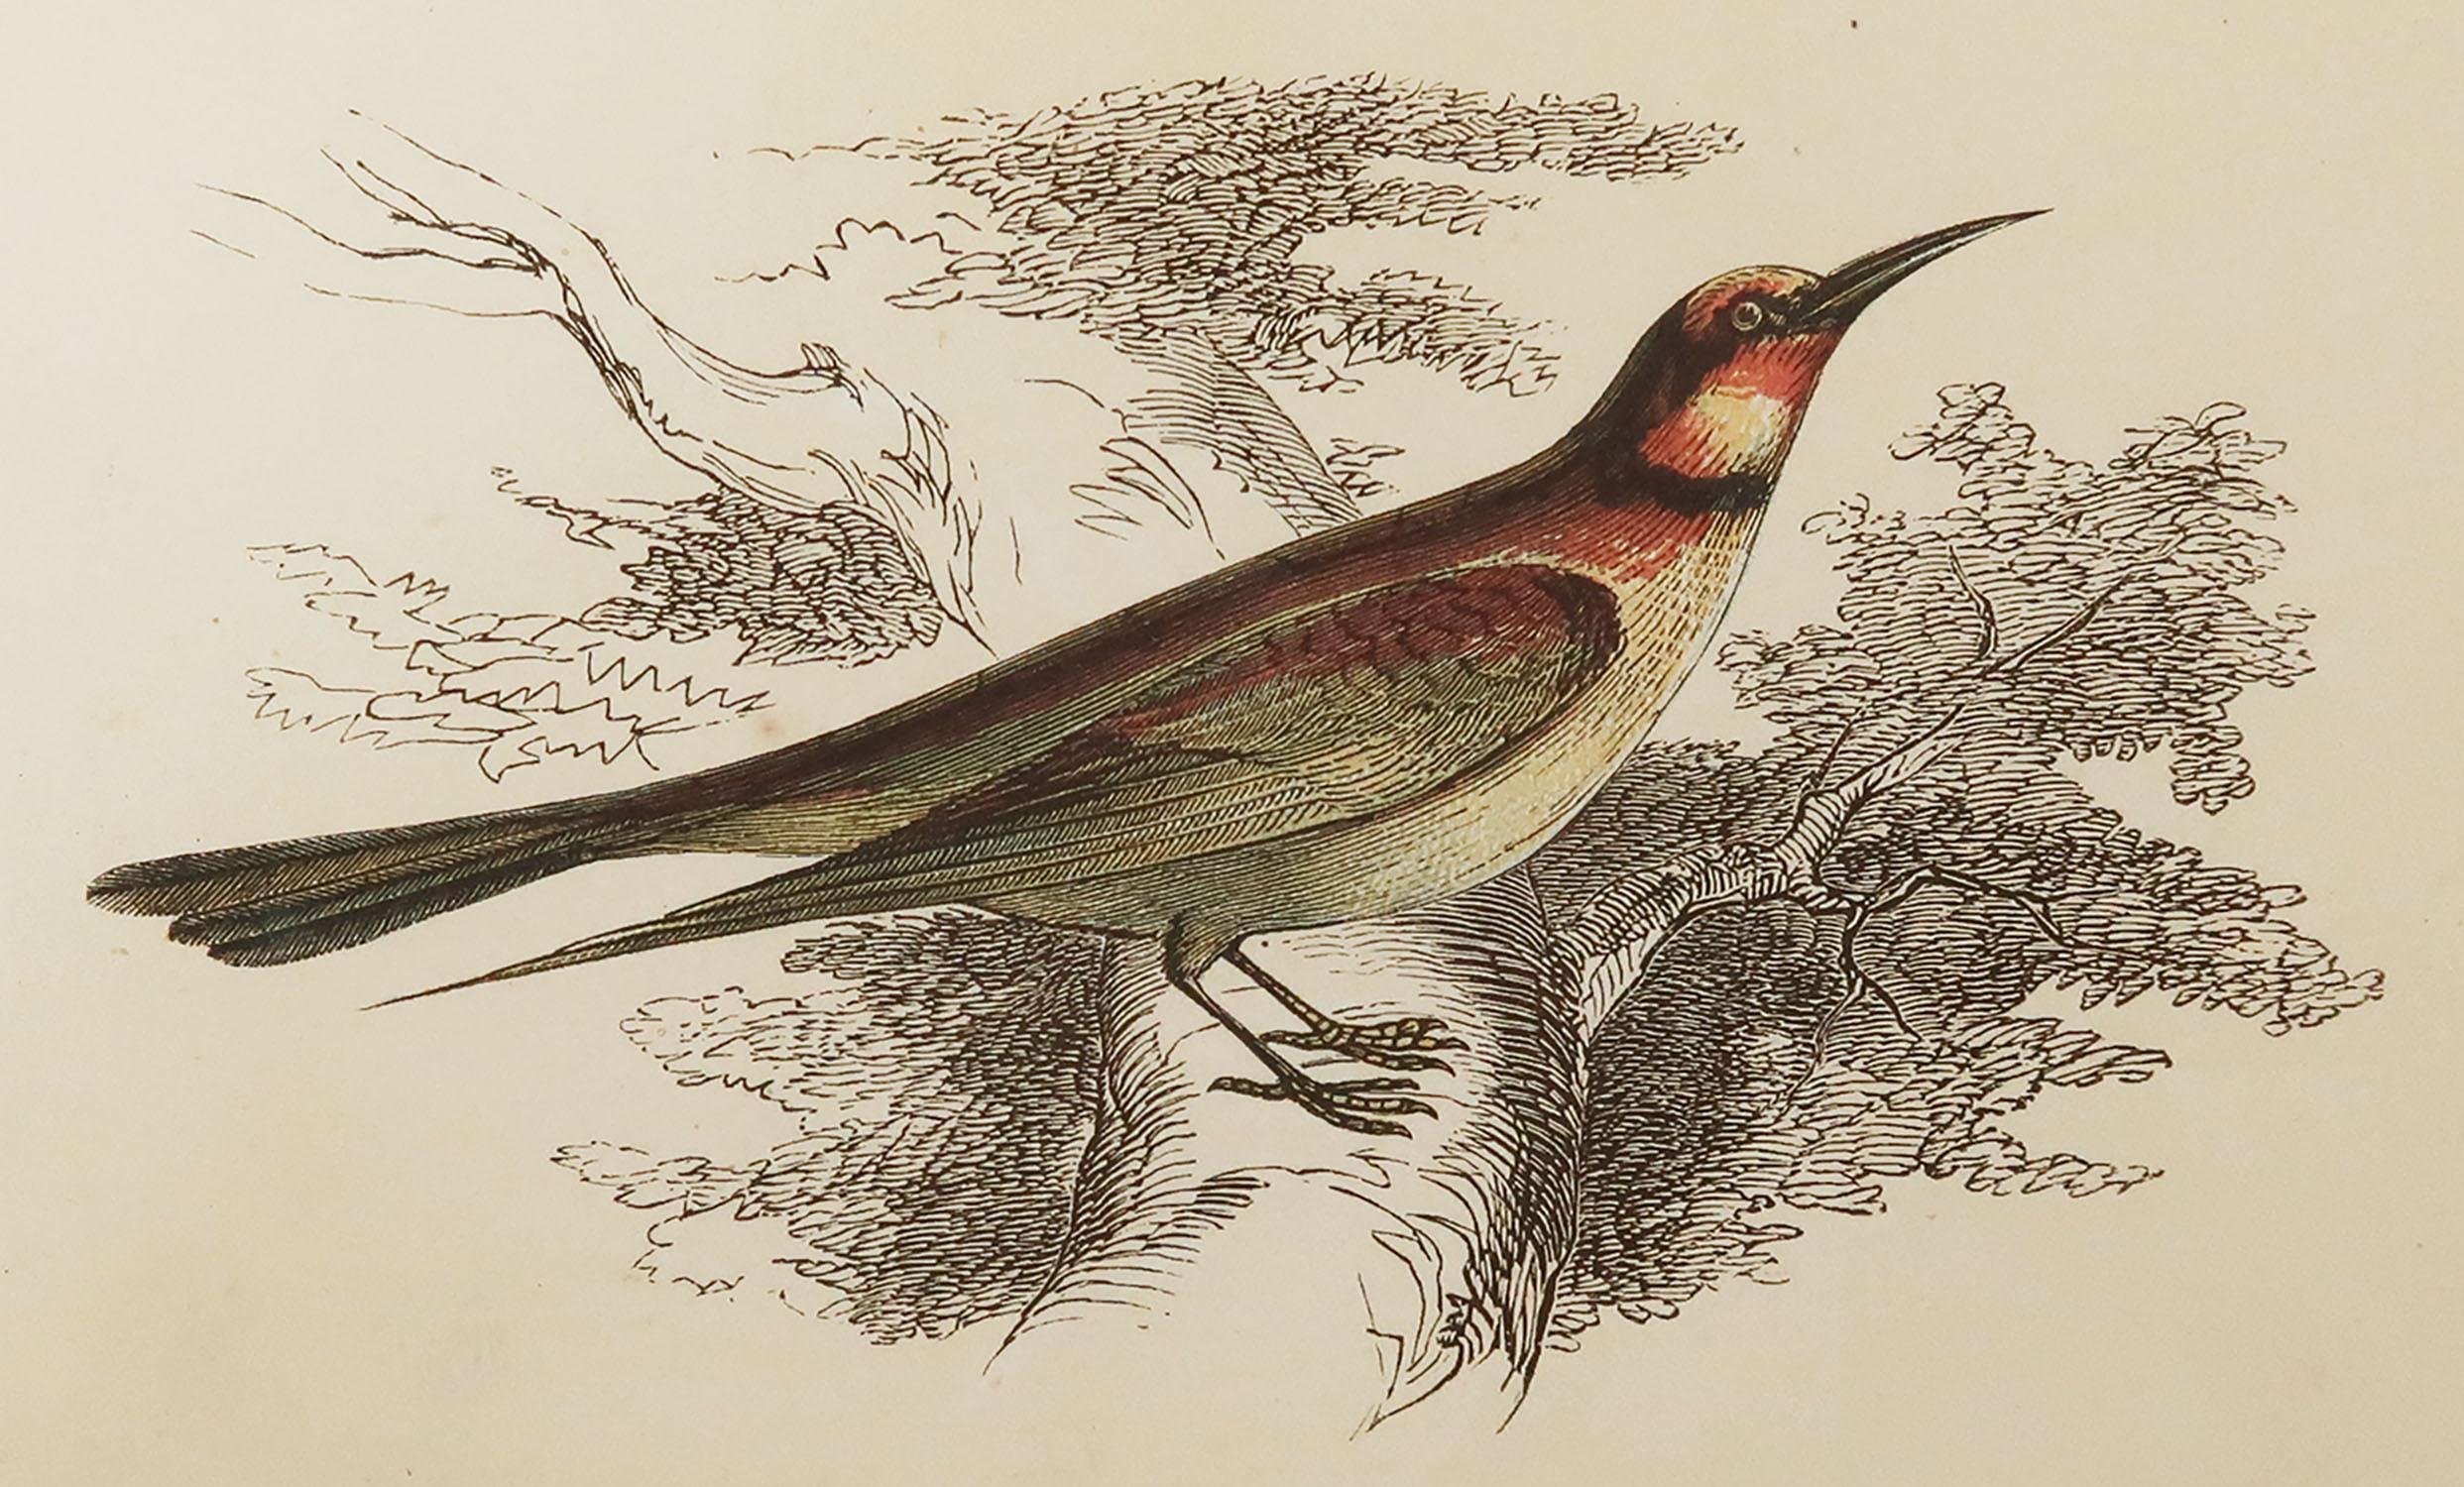 Great image of a bee-eater

Unframed. It gives you the option of perhaps making a set up using your own choice of frames.

Lithograph with original color.

Published by Tallis circa 1850

Crudely inscribed title has been erased at the bottom